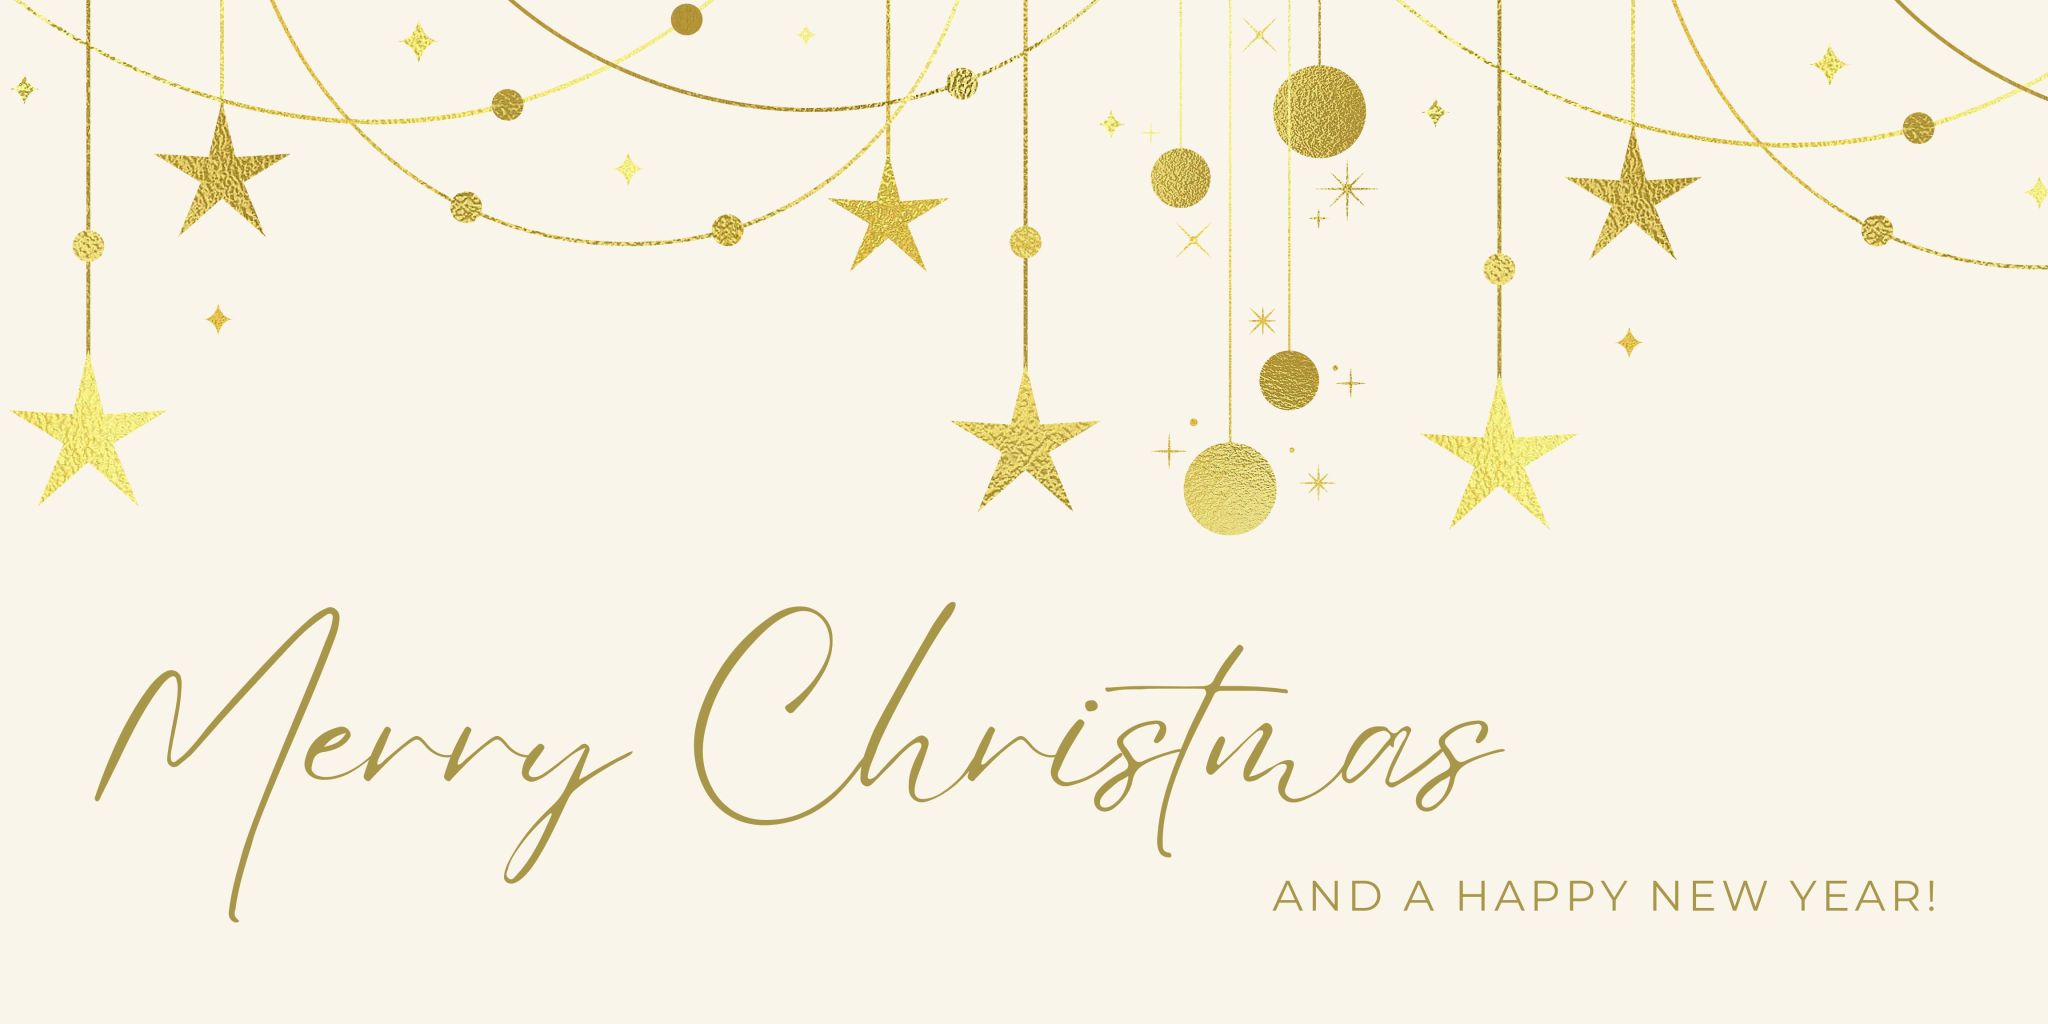 Merry Christmas and a Happy New Year banner in gold with stars and baubles.